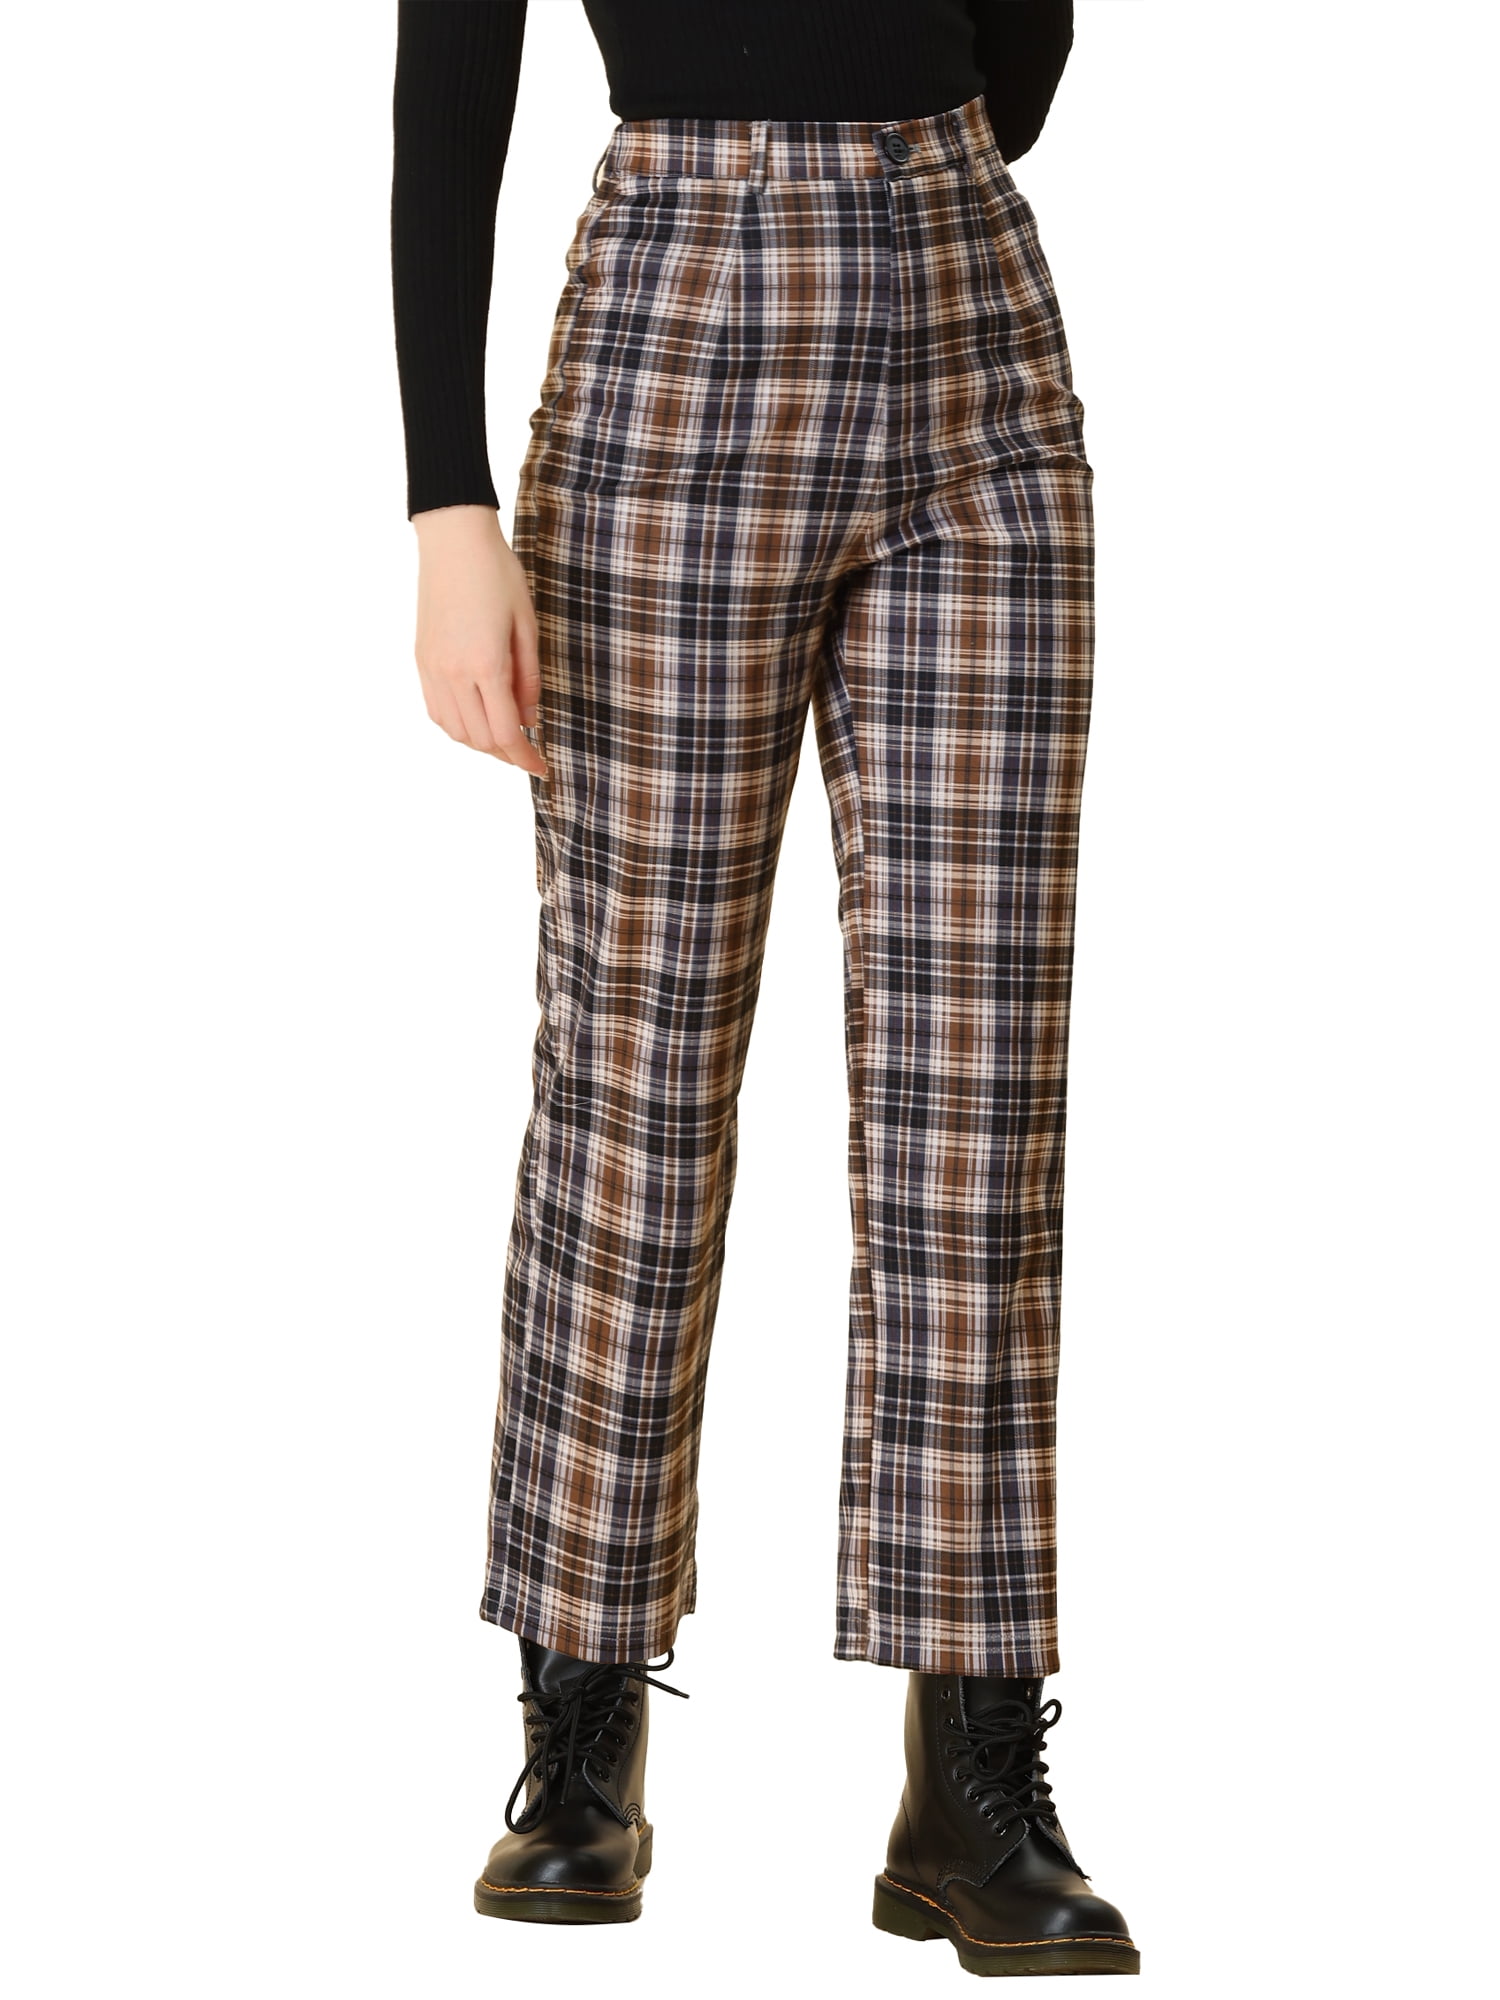 Men's Plush Sleep Pants: Red Buffalo Plaid Pants, Relaxed Fit, Sizes up to  3XL